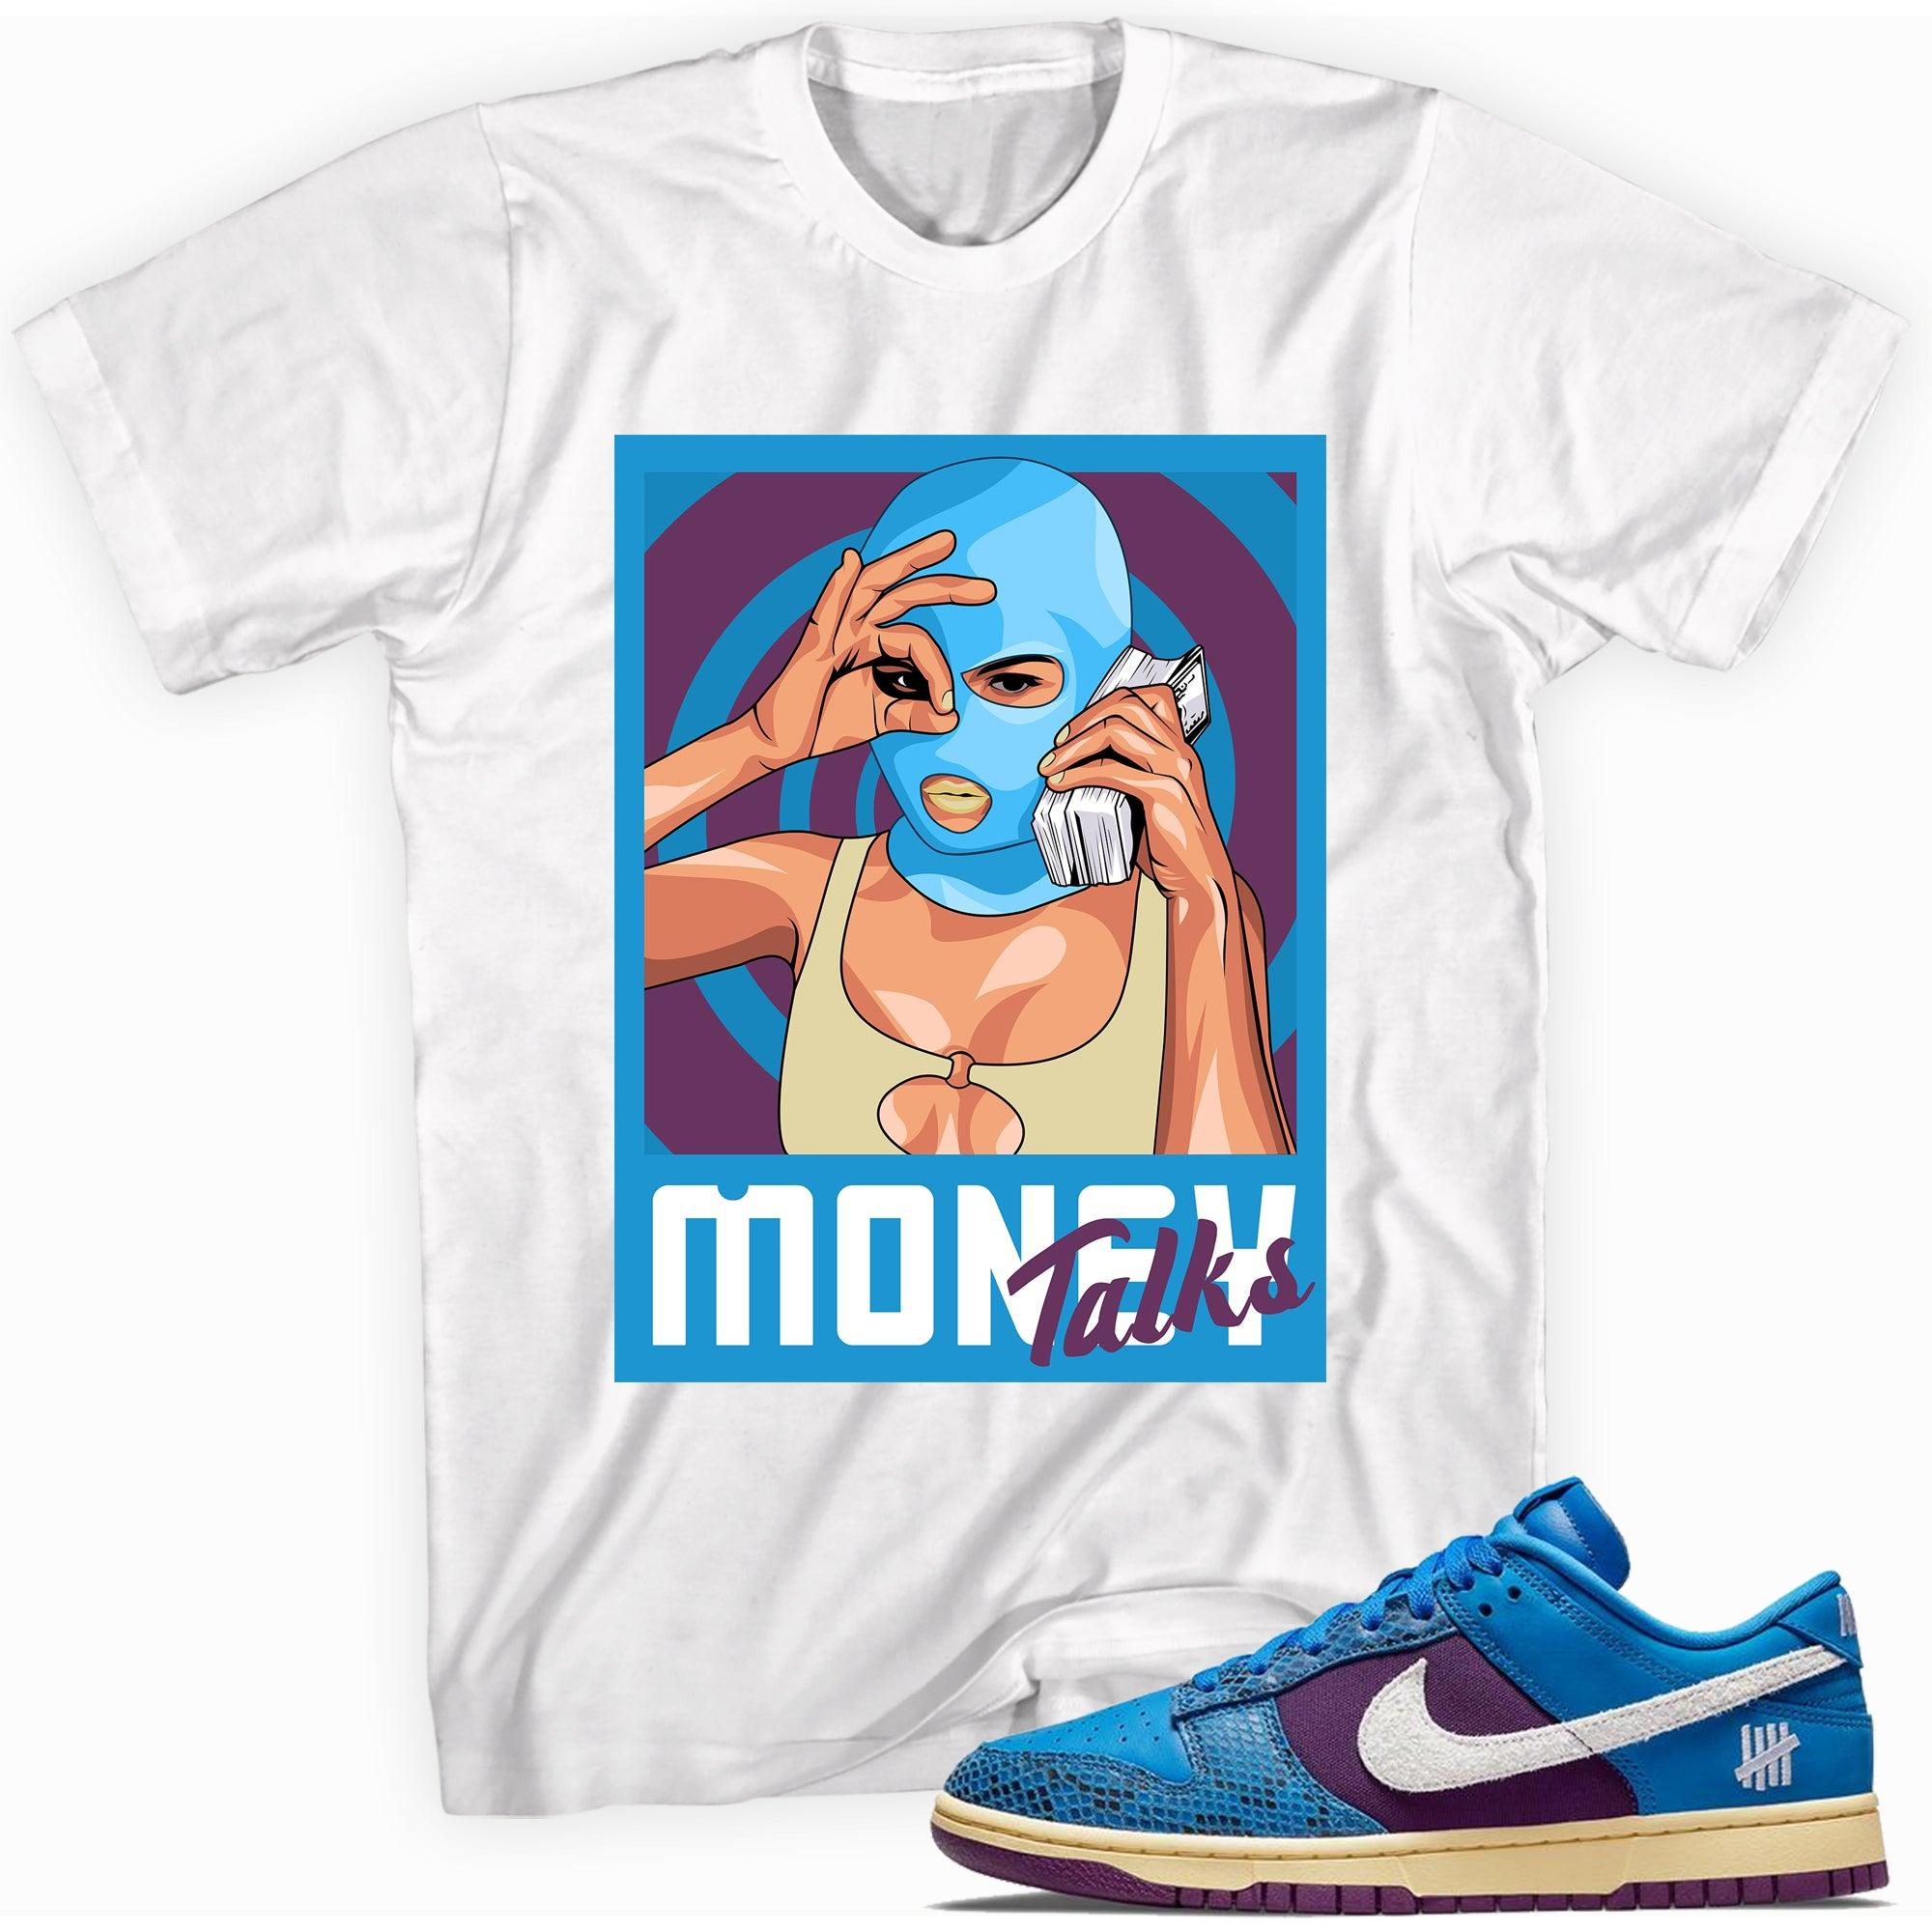 Money Talks Shirt Nike Dunk Low Undefeated 5 On It Dunk vs AF1 photo